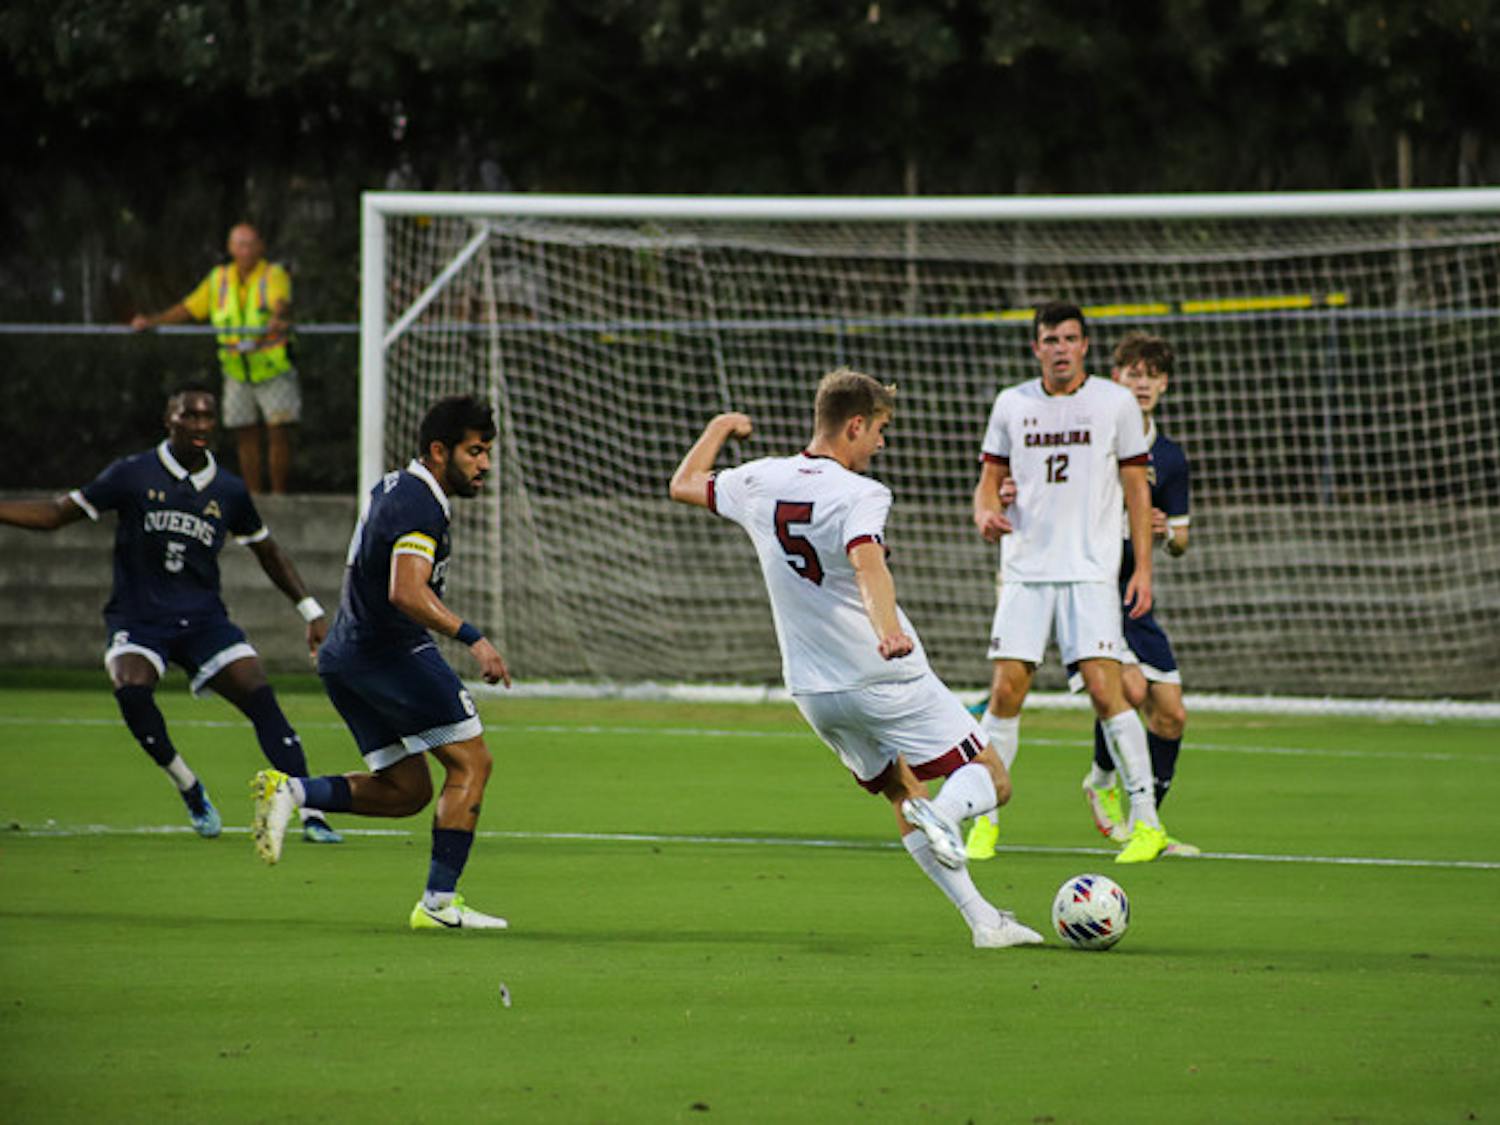 Freshman defensive midfielder William Nilsson attempts to shoot a goal during South Carolina's match against Queens University of Charlotte on September 20, 2022. The Gamecocks beat the Royals 3-1.